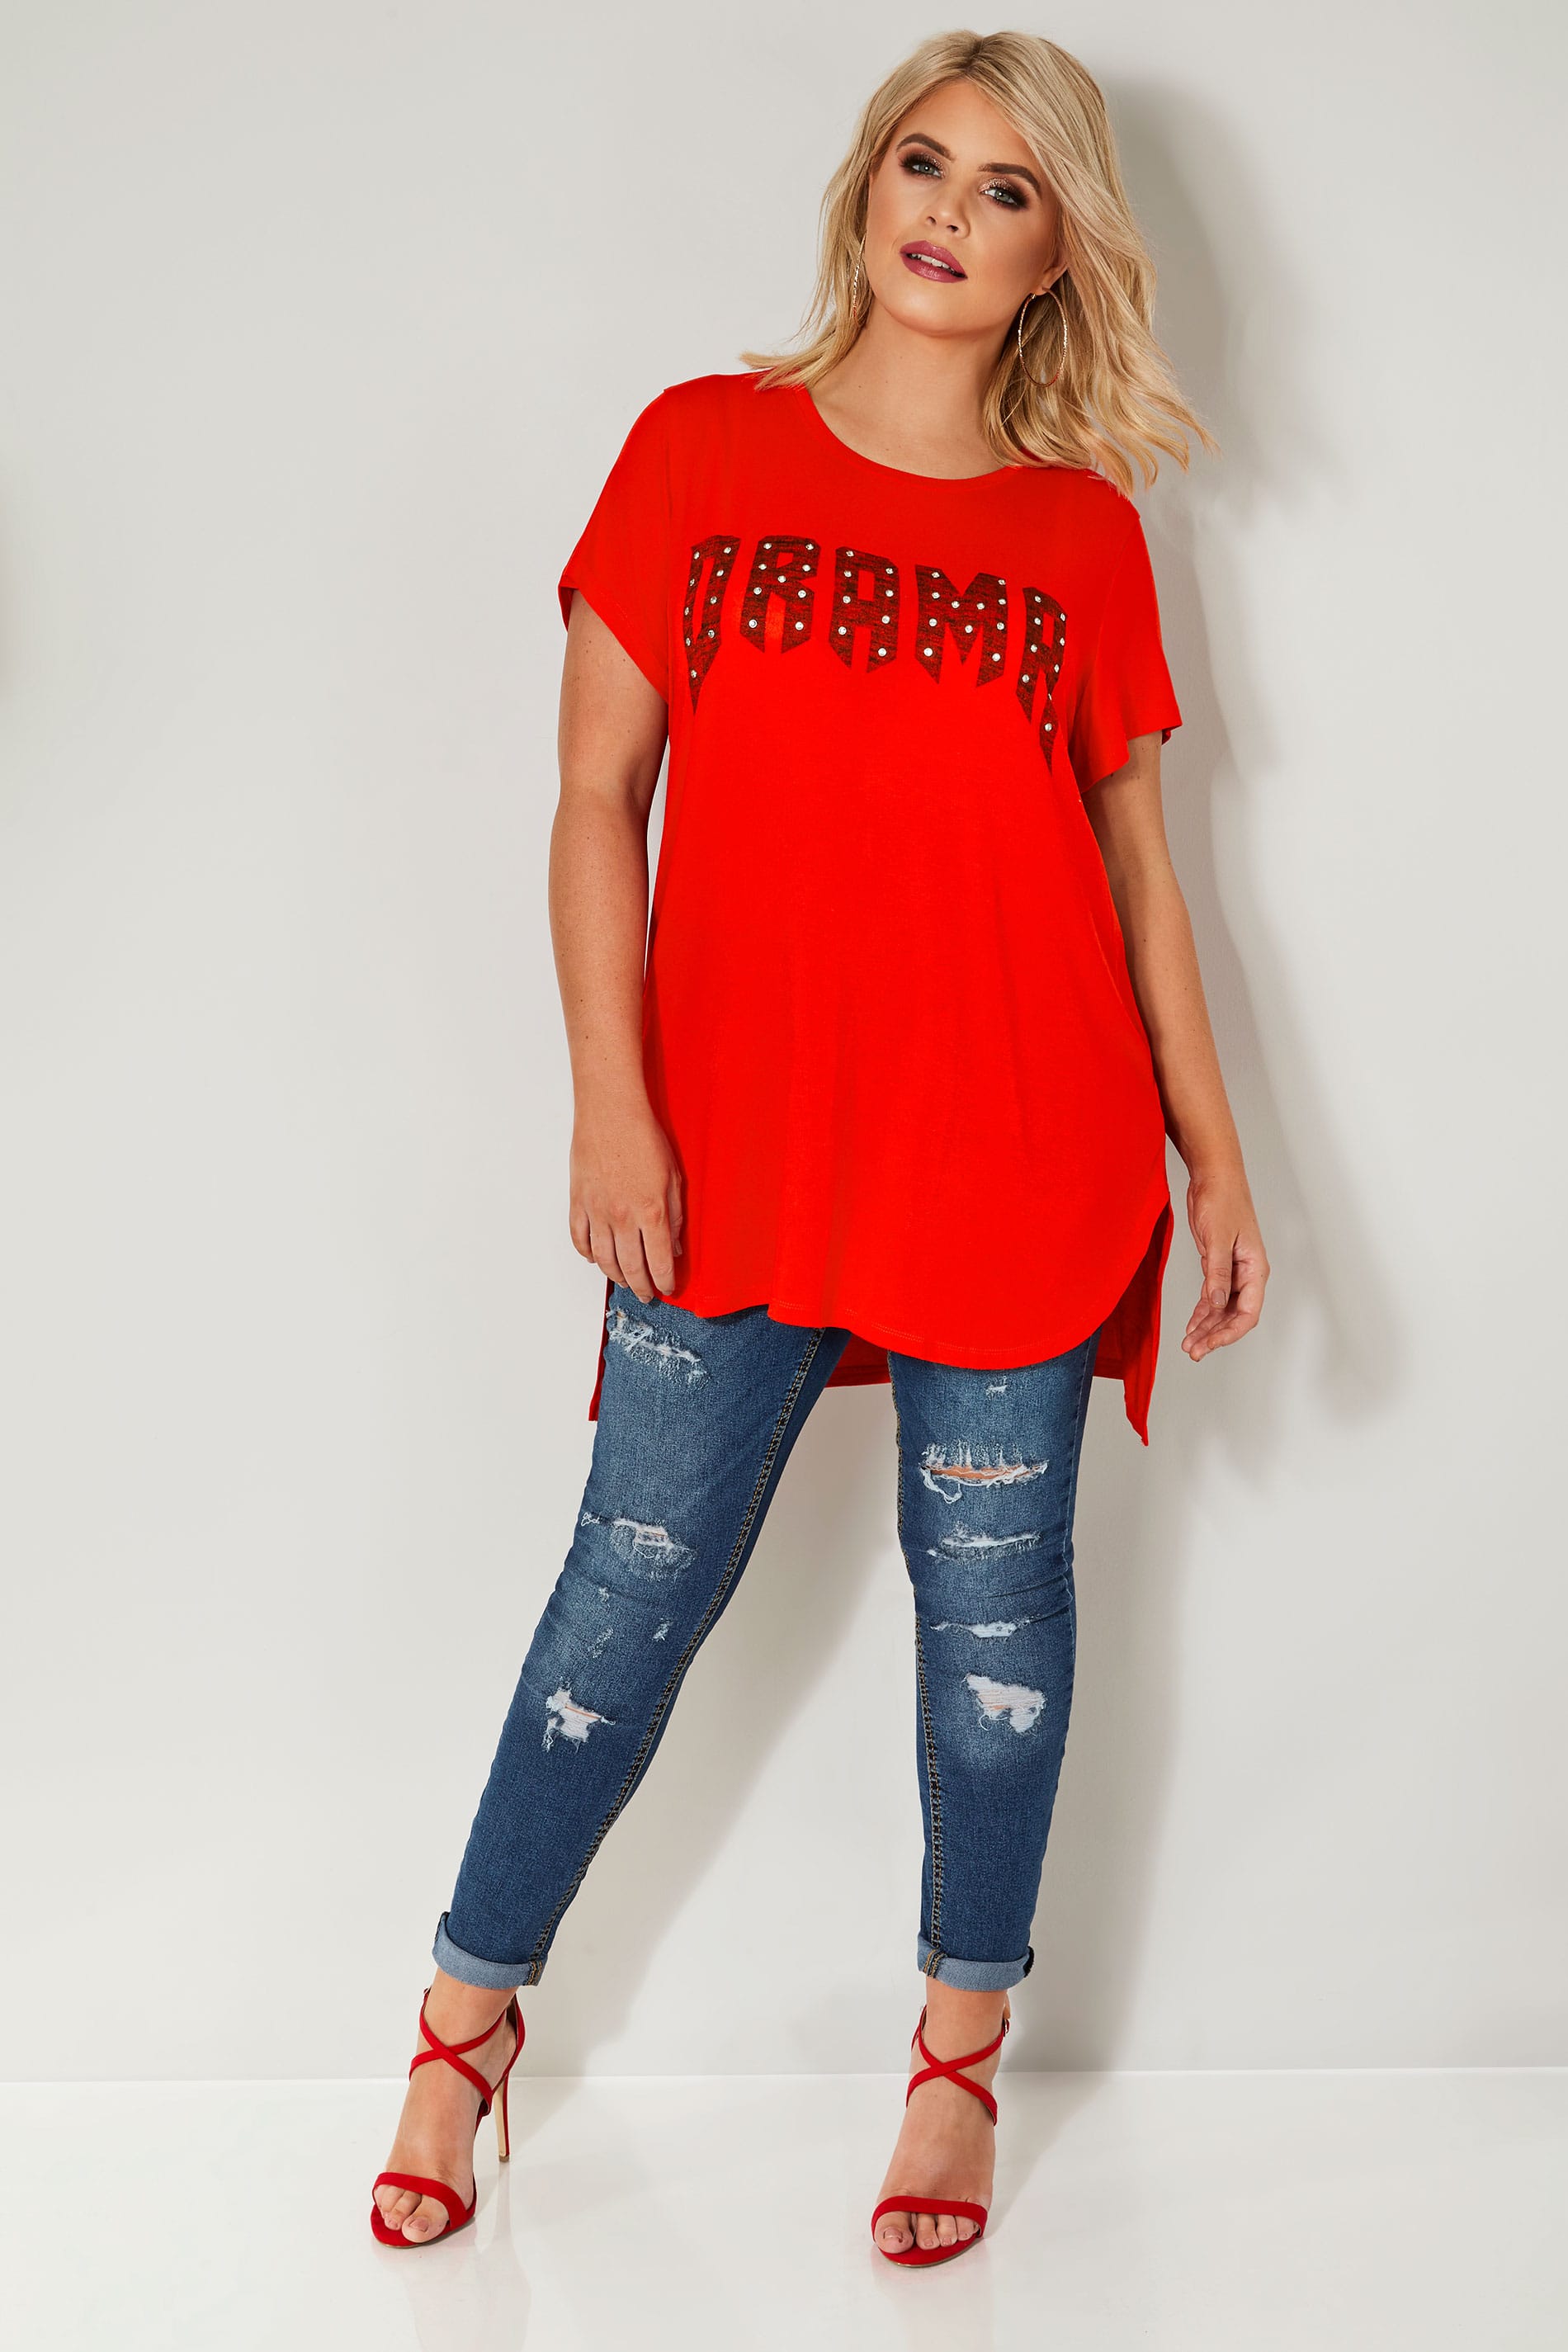 LIMITED COLLECTION Red Embellished 'Drama' Top, Plus size 16 to 32